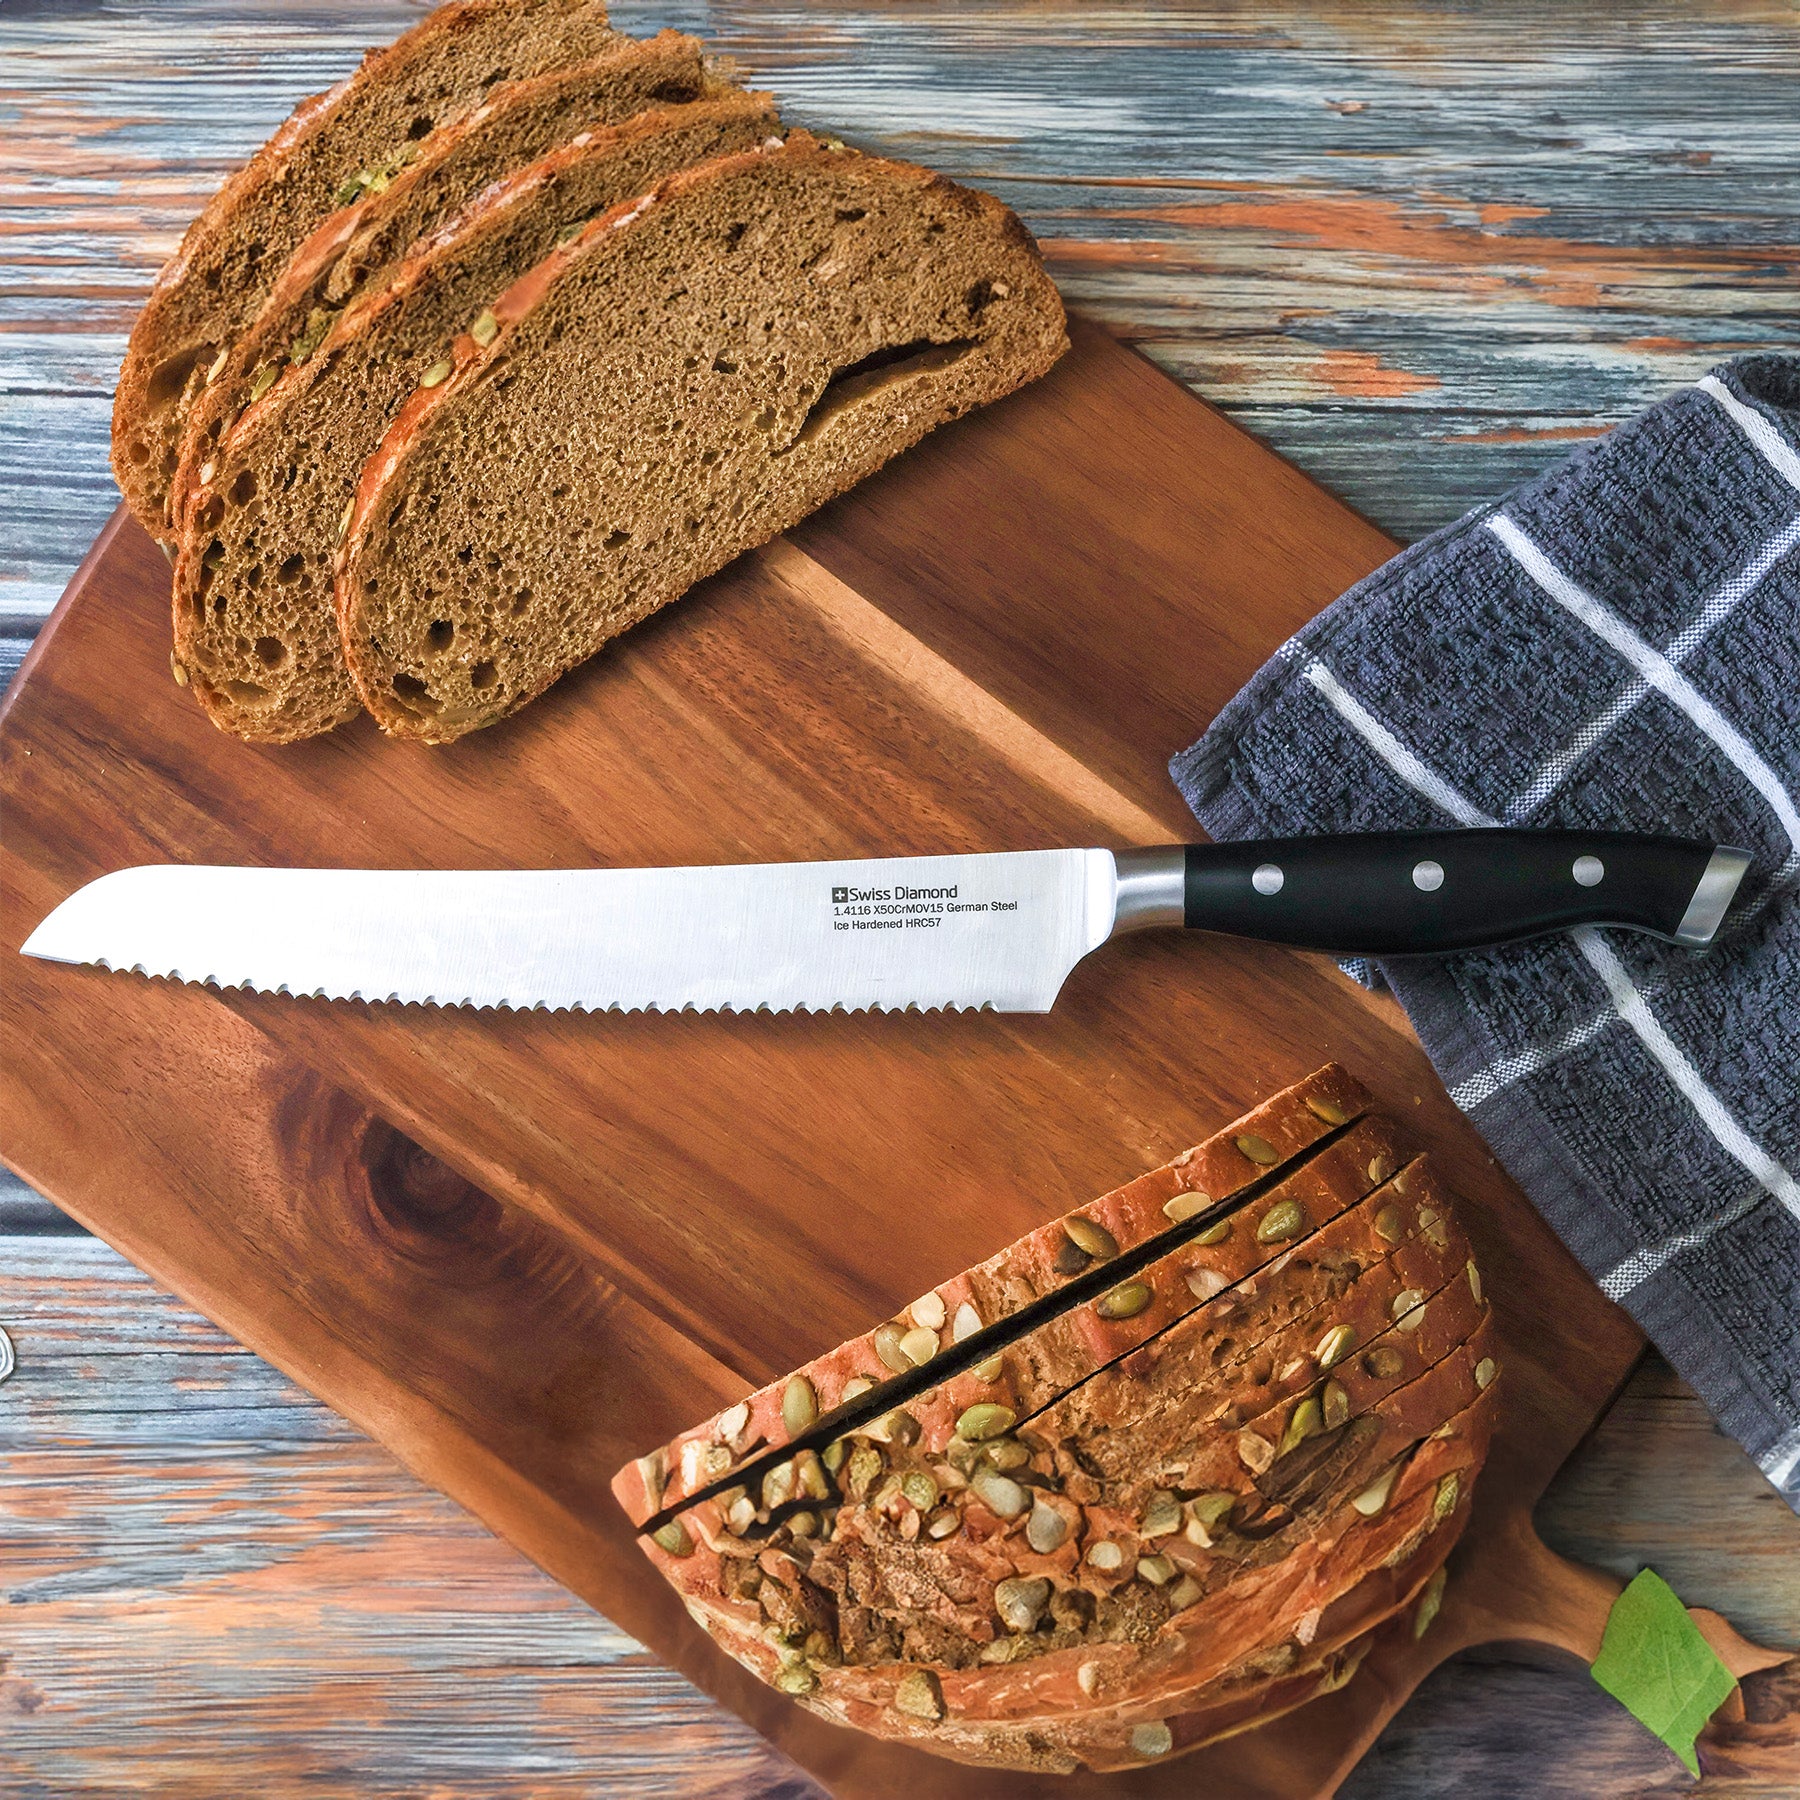 8.5" Bread Knife in use laying on cutting board next to sliced bread